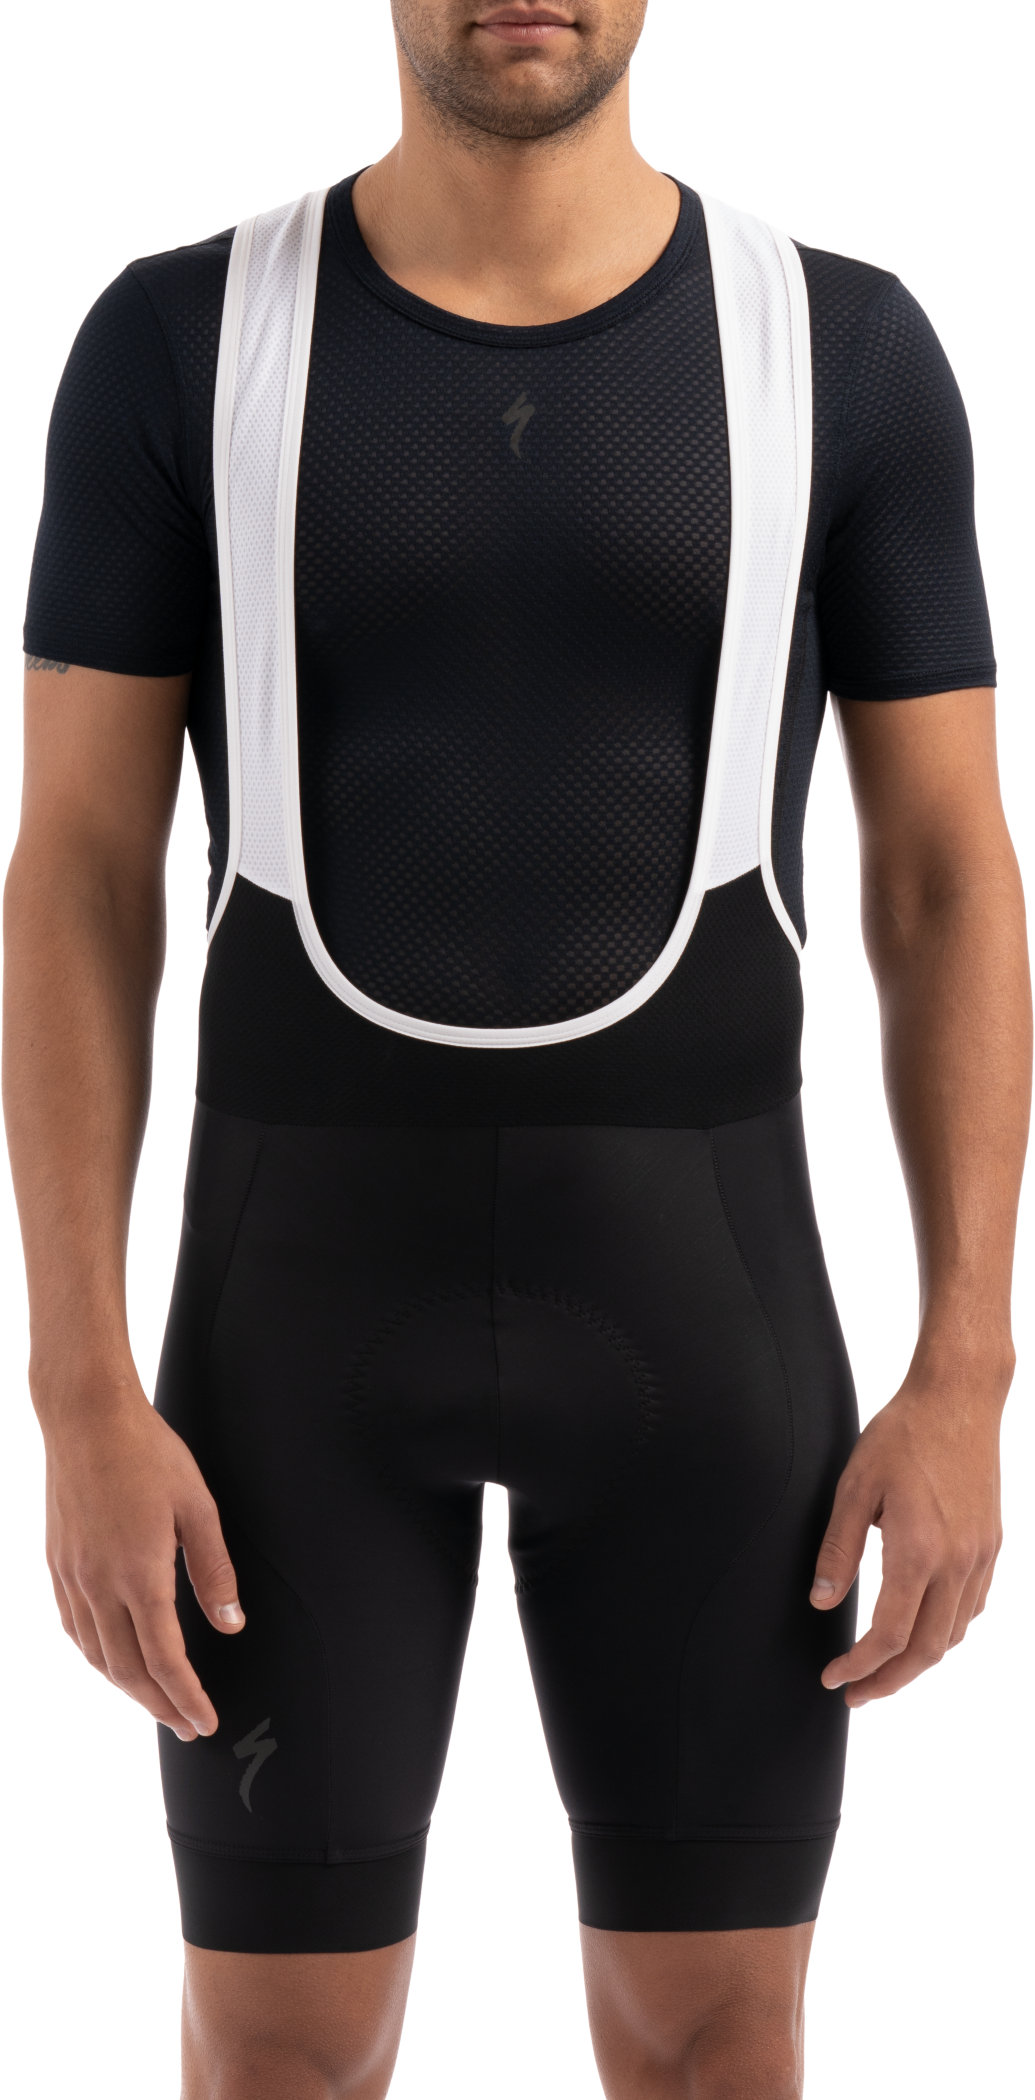 specialized rbx cycling shorts